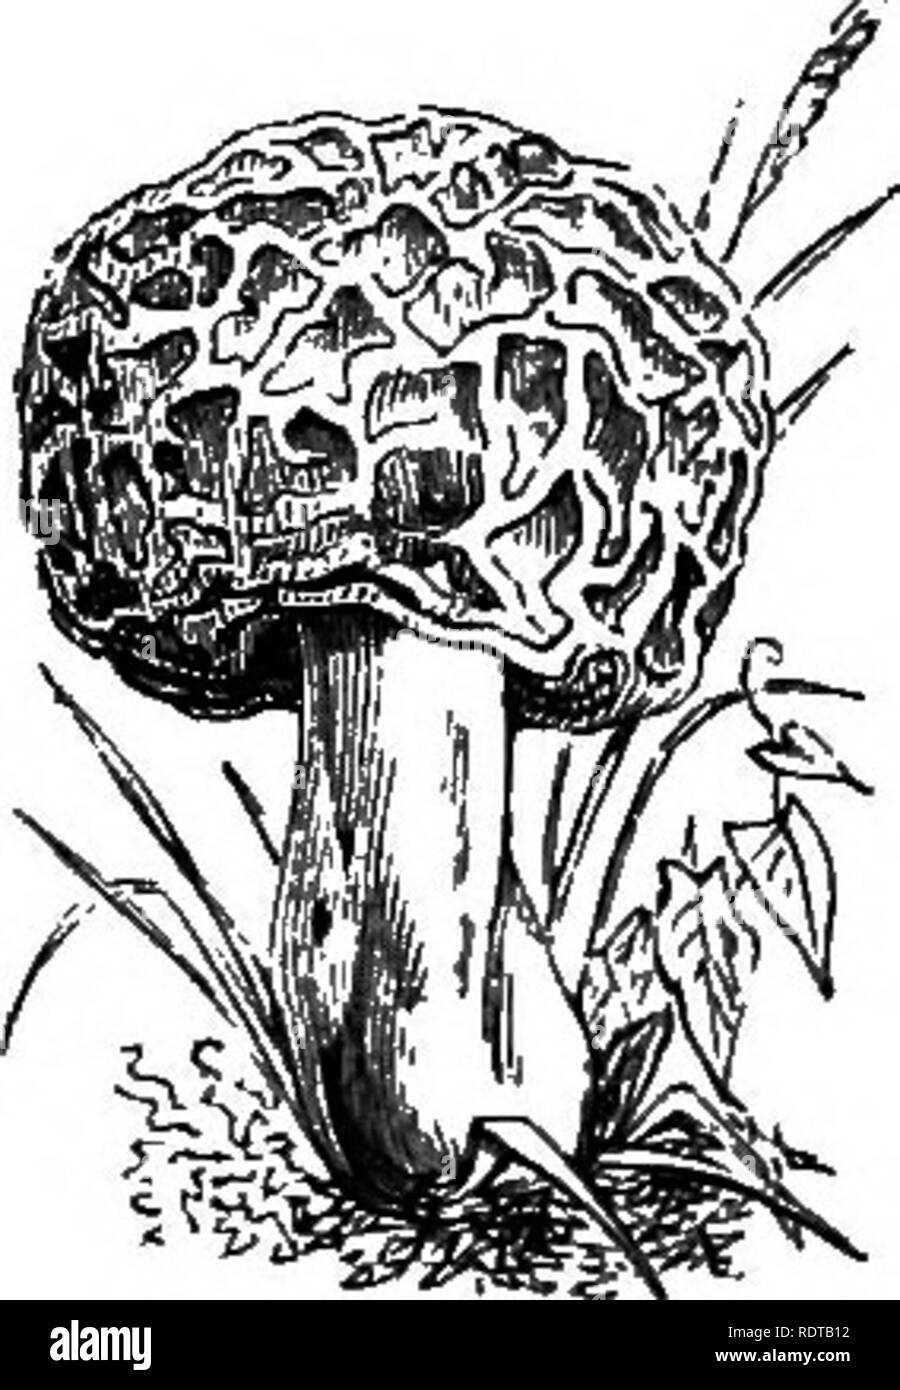 . My garden, its plan and culture together with a general description of its geology, botany, and natural history. Gardening. Fig, 835 a.—Ergot of Rye. Fig, 836.—Agaricus fascicularis. Fig. 837.—Morel. I had a confession that he had not, and I earnestly warned him not to recommend persons ignorant of their nature to partake of them. I go much further, and state that cheese infested with fungus is not desirable, and that food, whether animal or vegetal, with fungus upon it, especially when cholera is prevalent, should never be eaten. In the Fern-house the Phallus impudiciis (fig. 840) grows, an Stock Photo